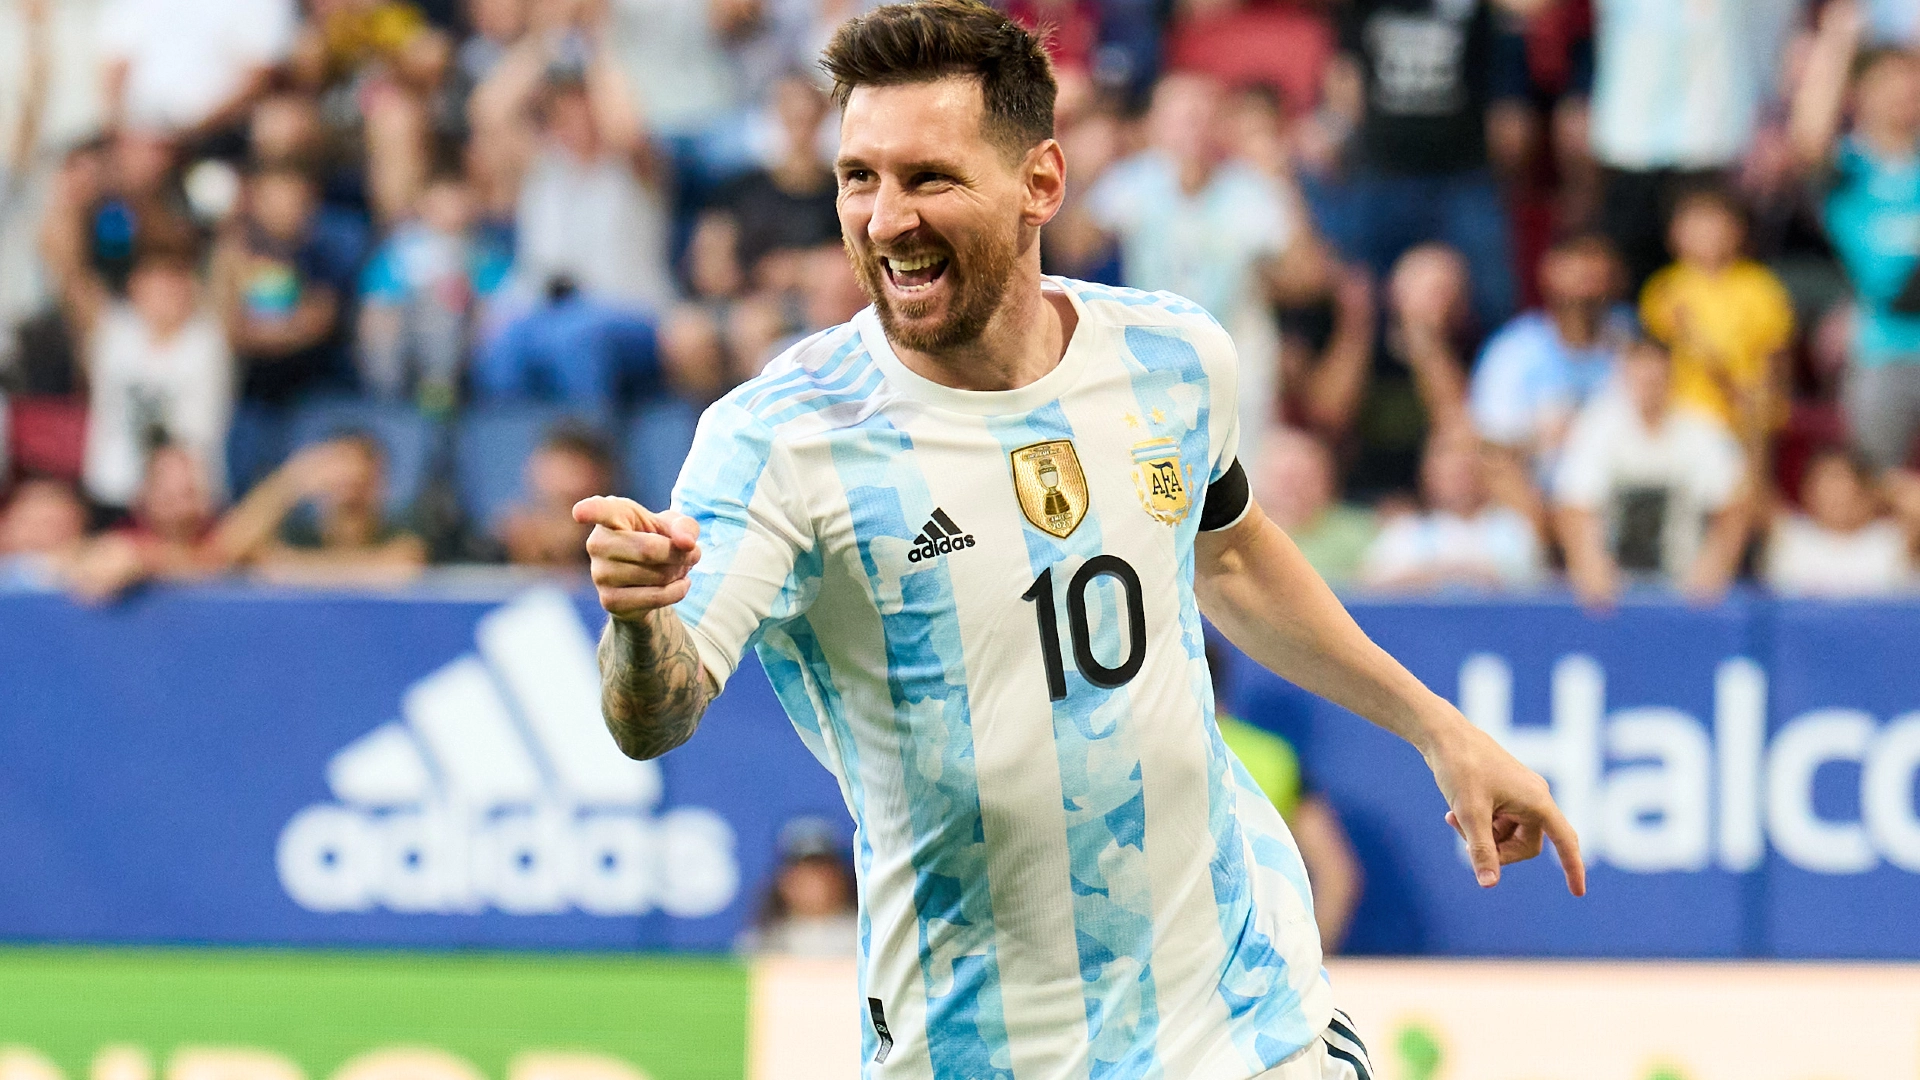 Lionel Messi announces retirement, says FIFA World Cup final will be his last game